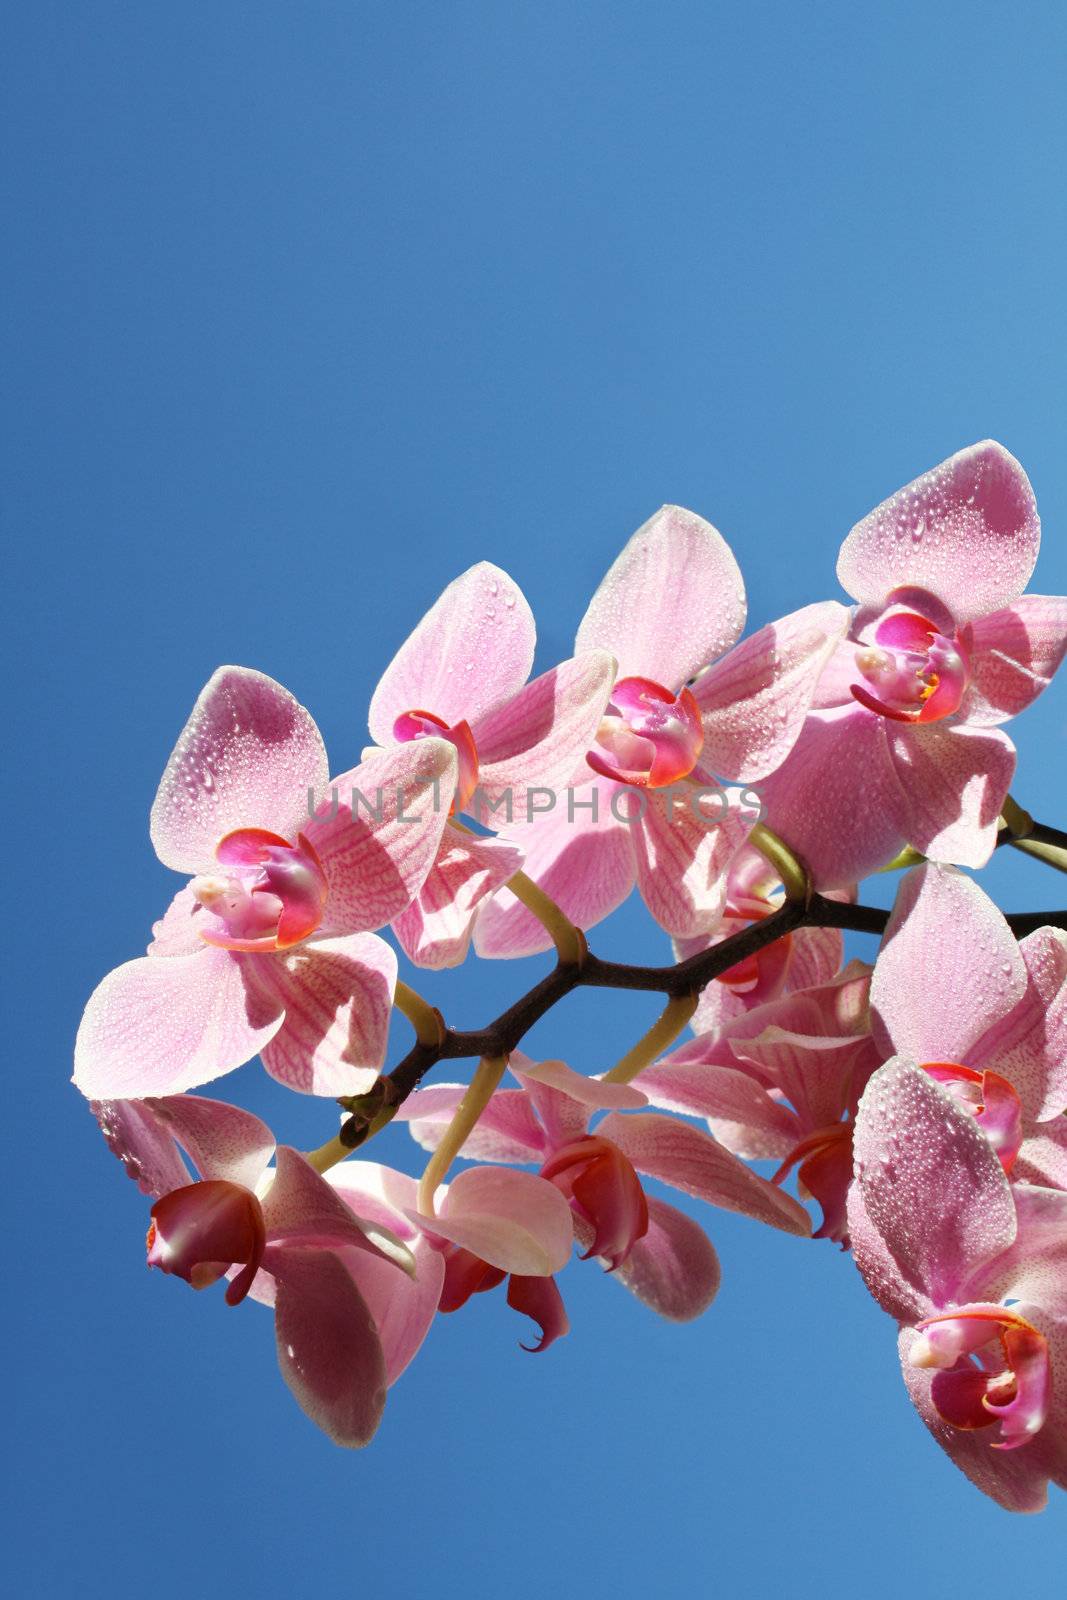 Orchids in the sky by photochecker